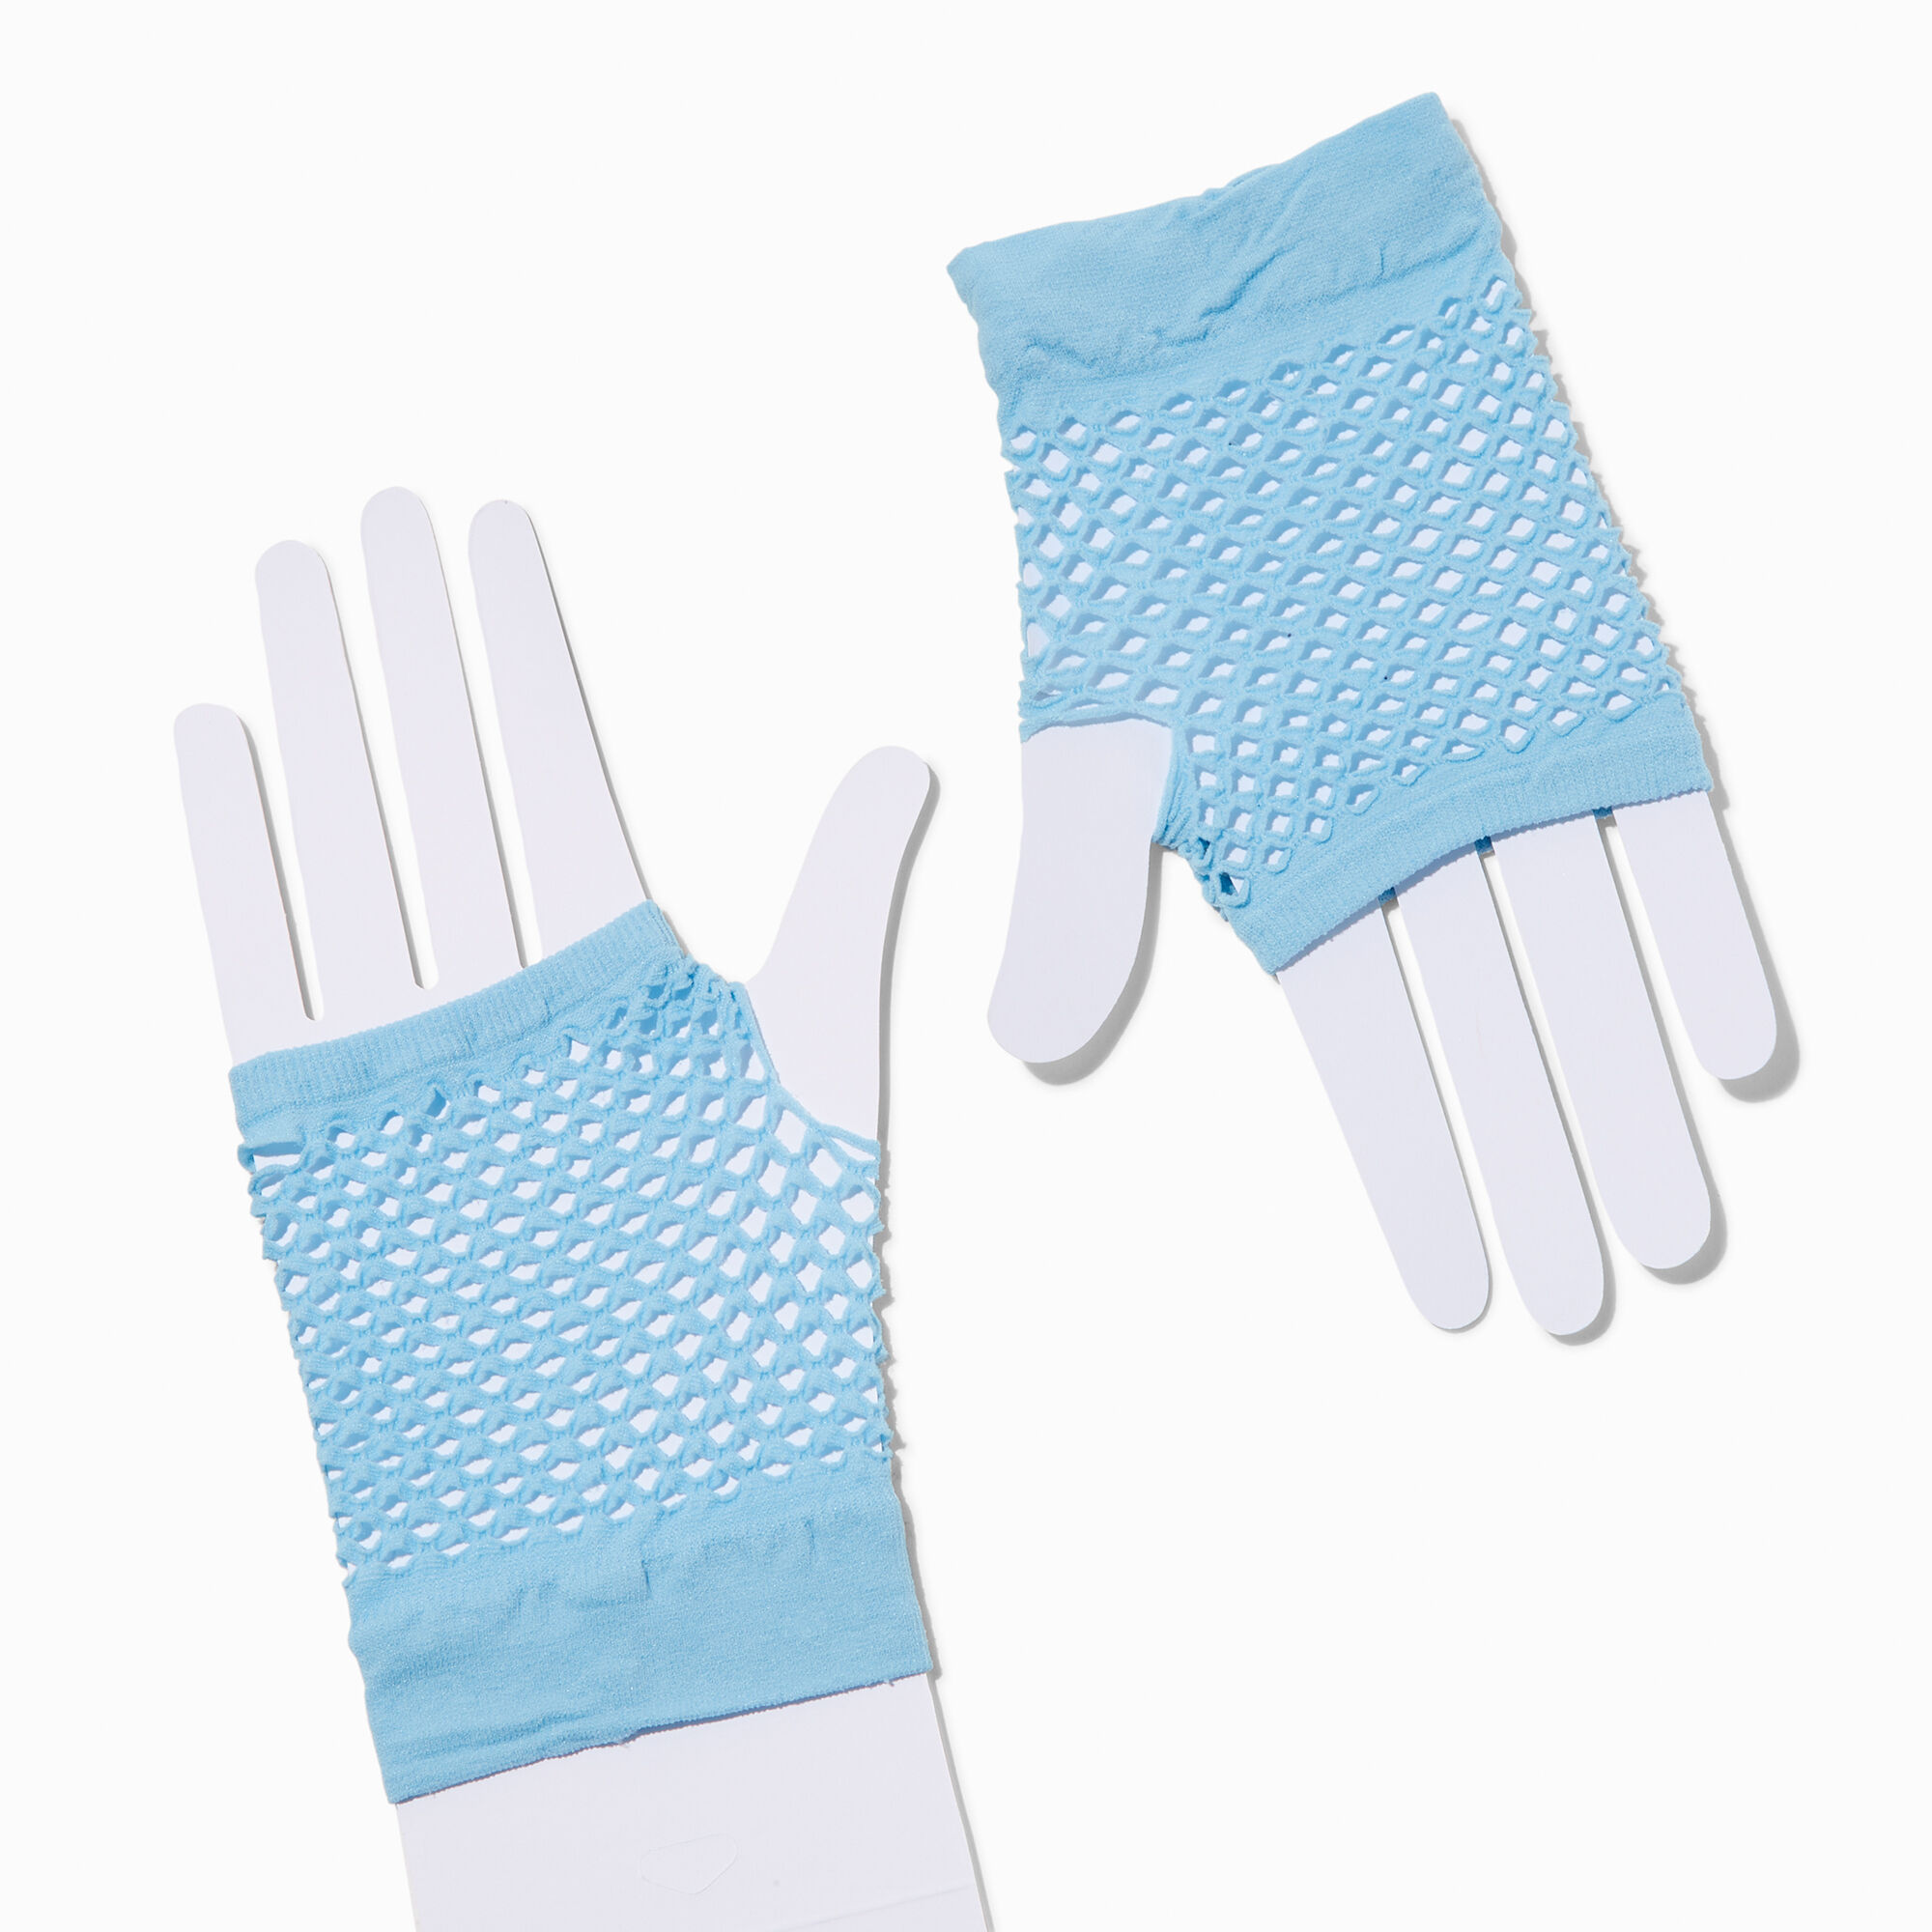 View Claires Fishnet Fingerless Gloves Baby Blue information